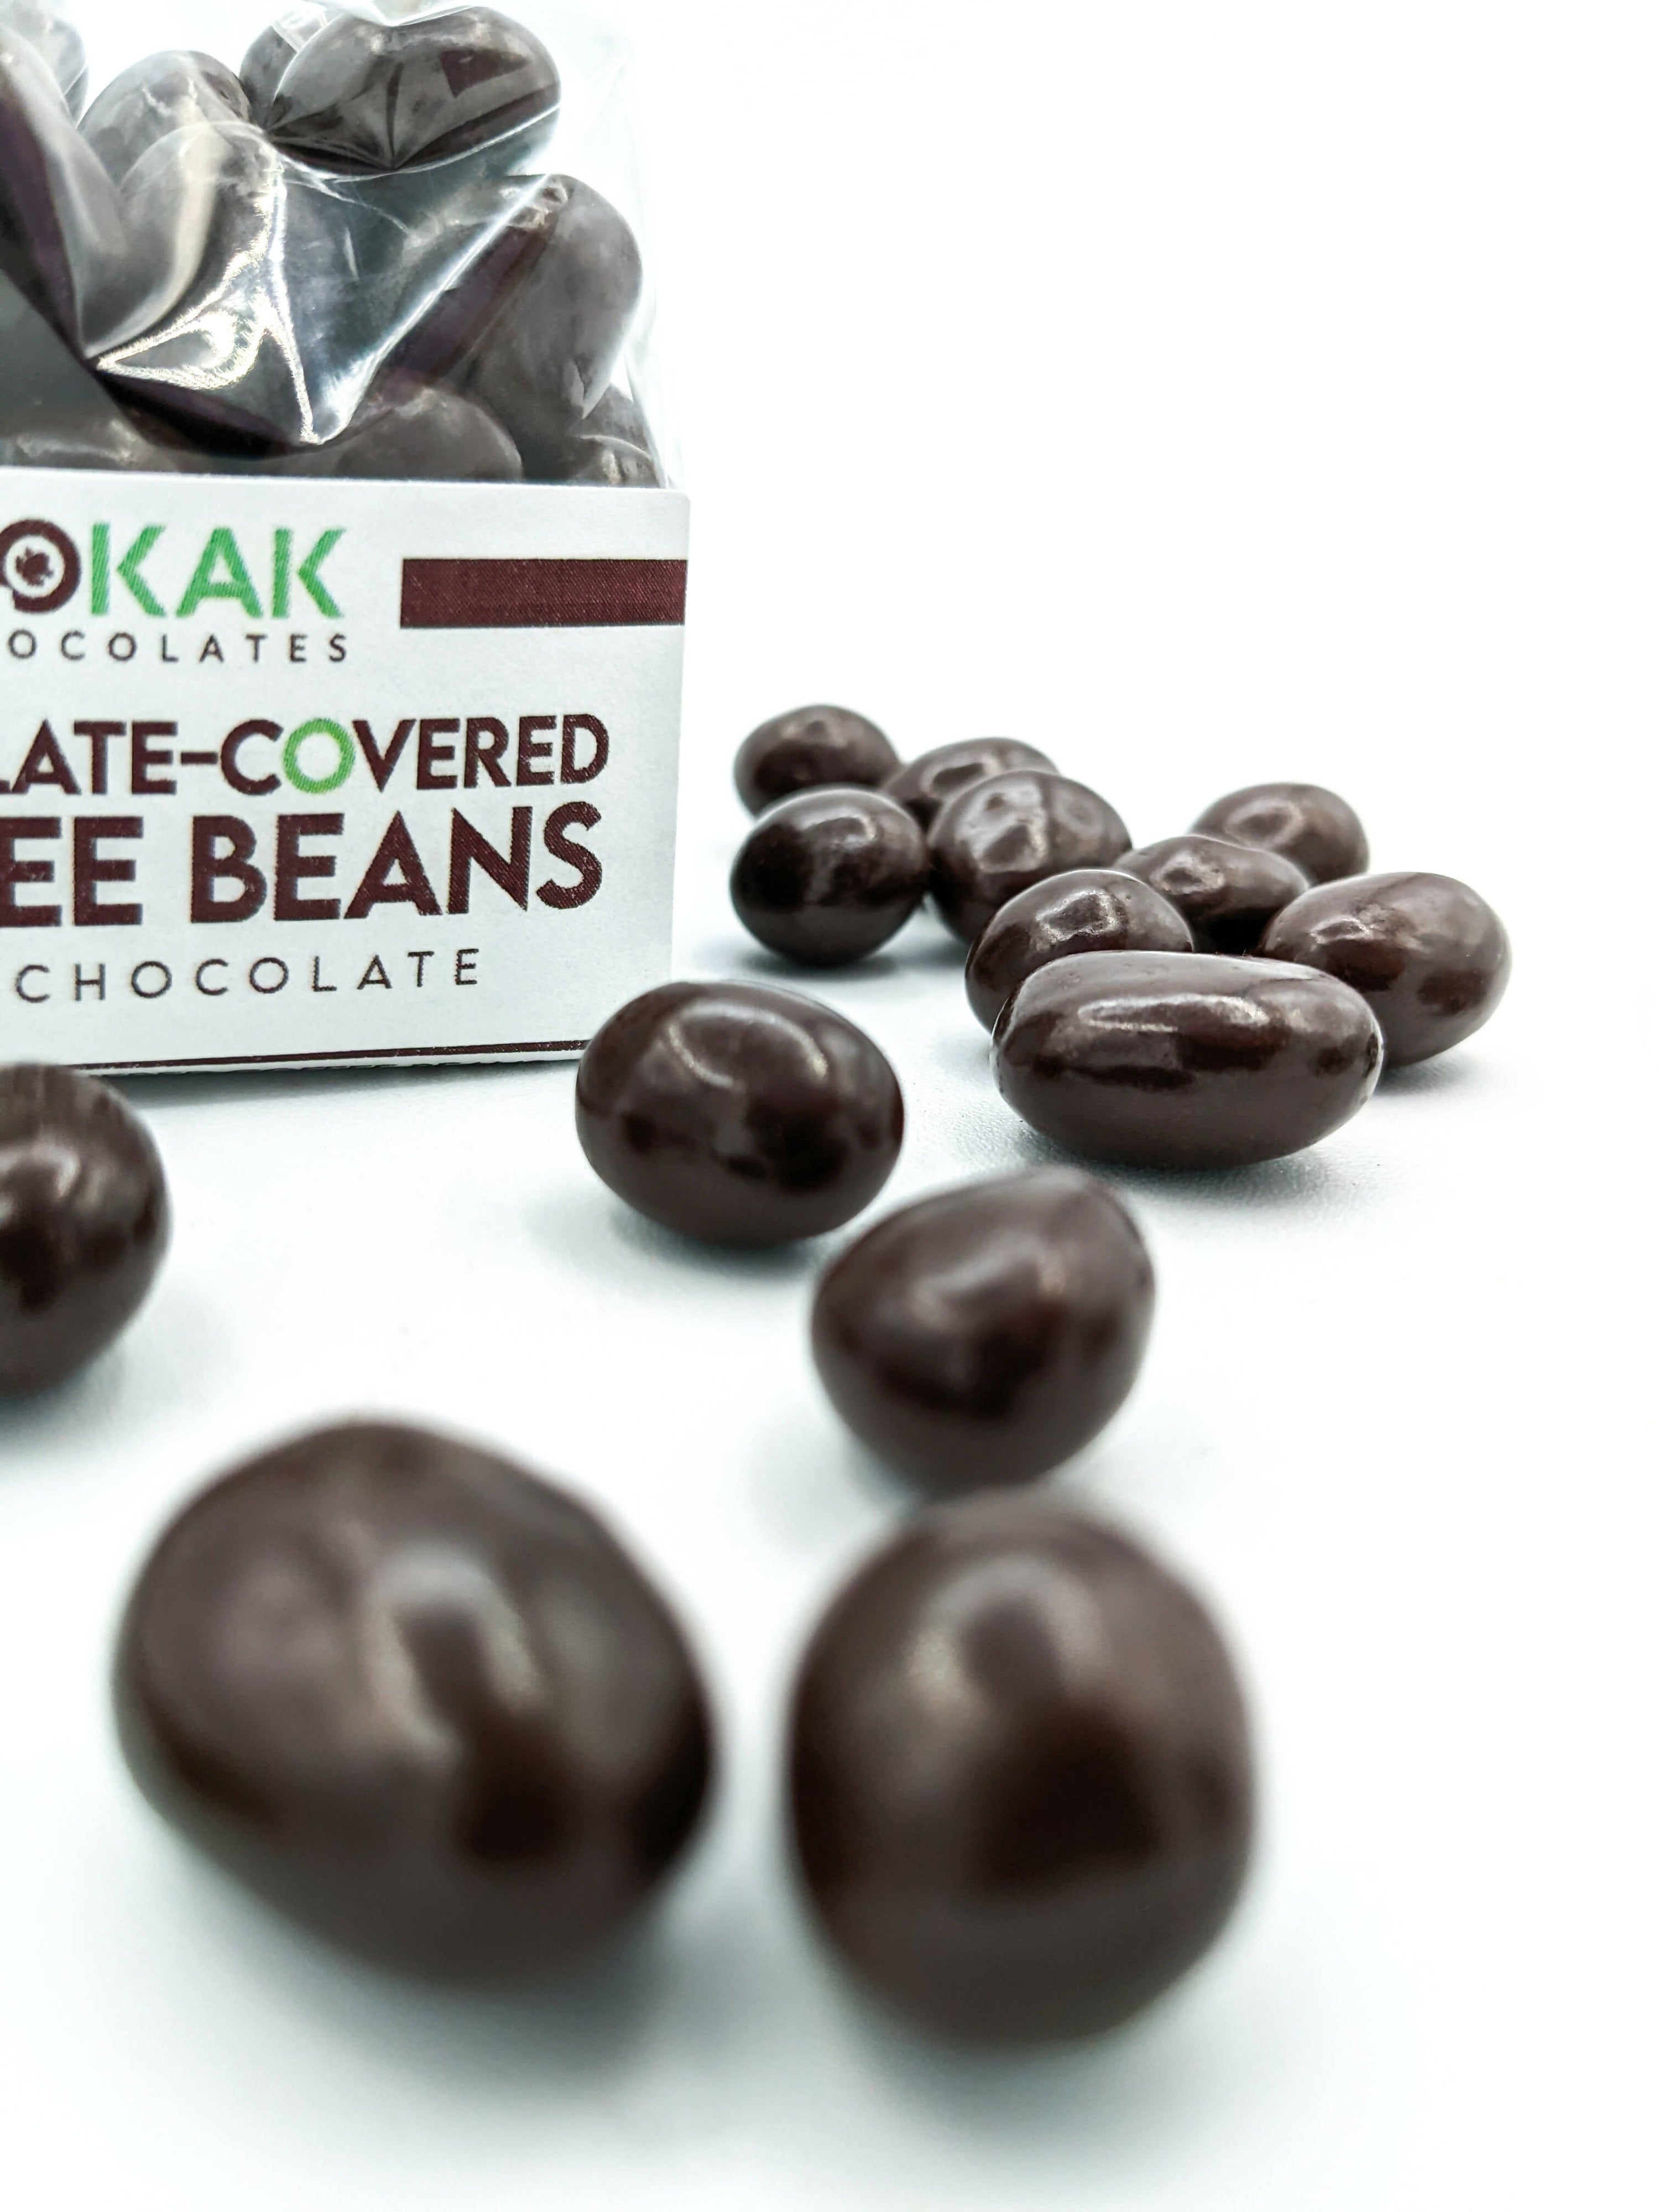 Chocolate-covered Coffee Beans